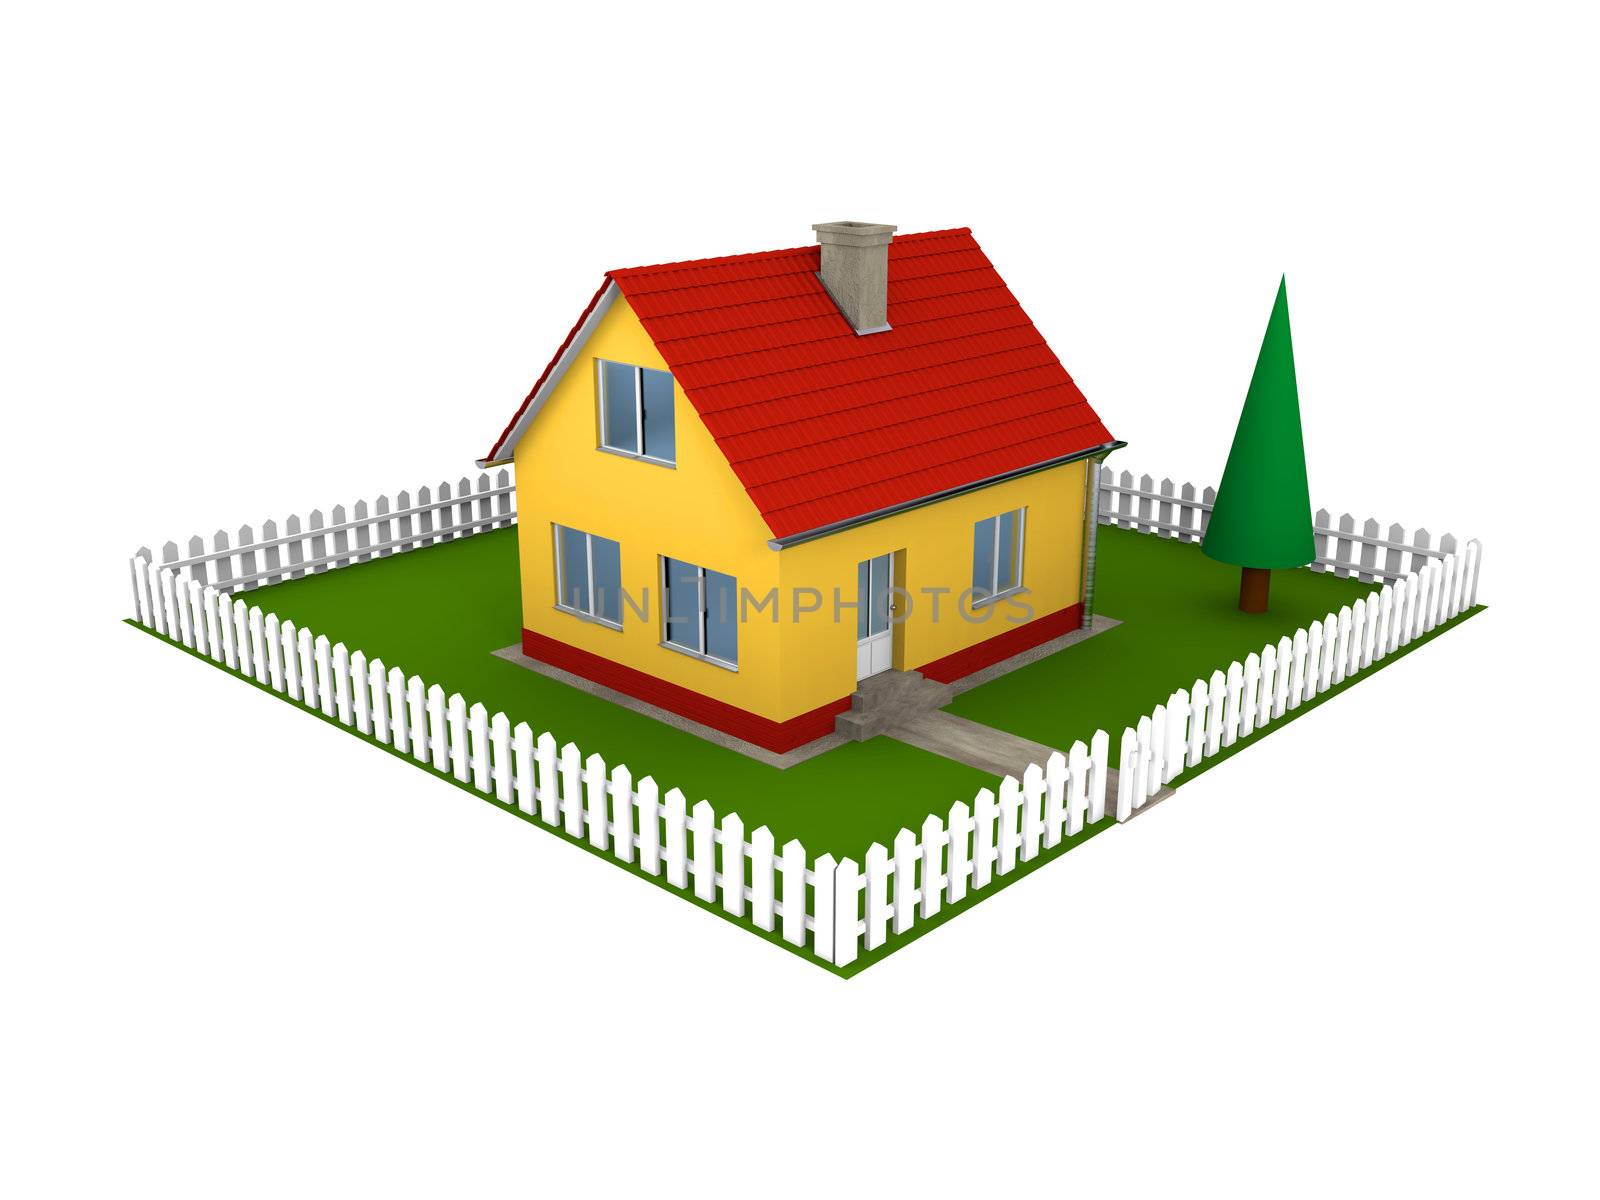 Illustration of small family house with red roof and green yard with white fence